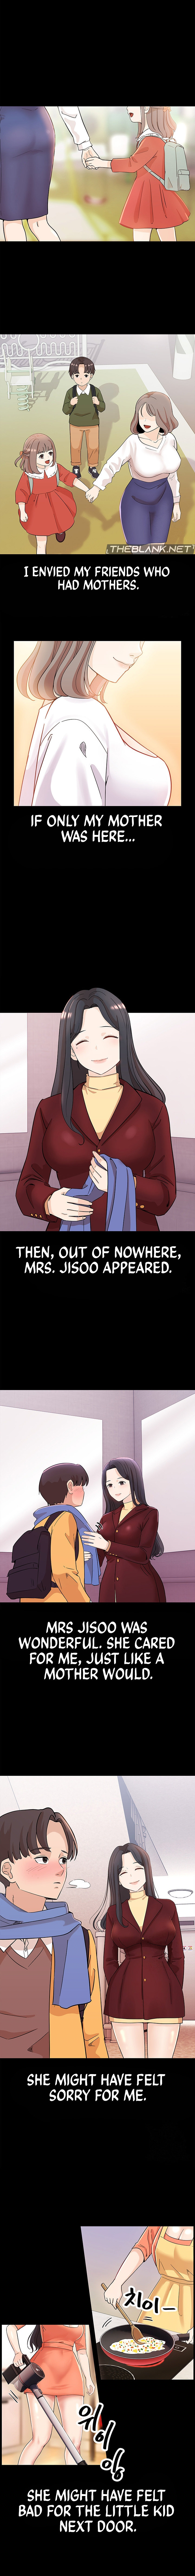 Lustful Woman - Chapter 5 Page 5